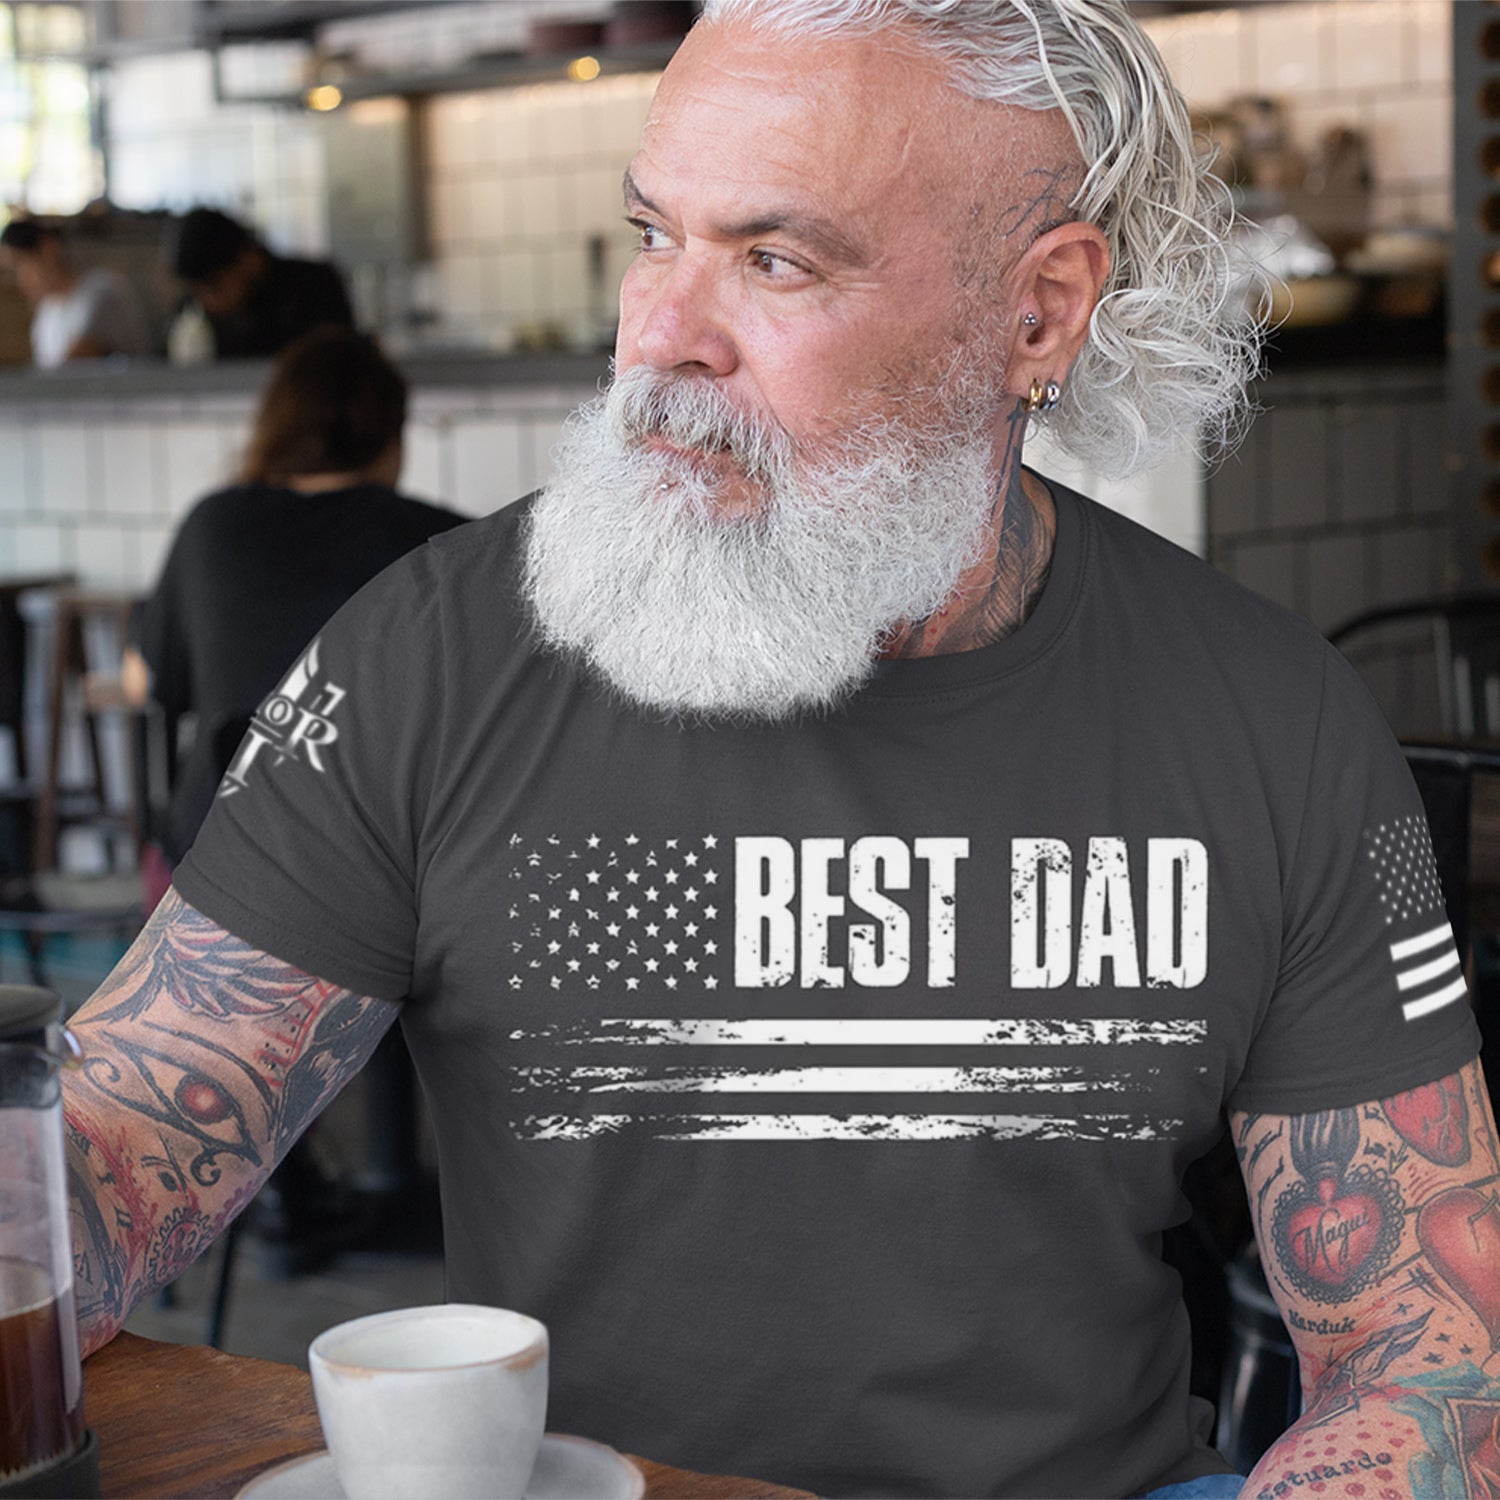 A proud father sporting our new best dad T-Shirt.